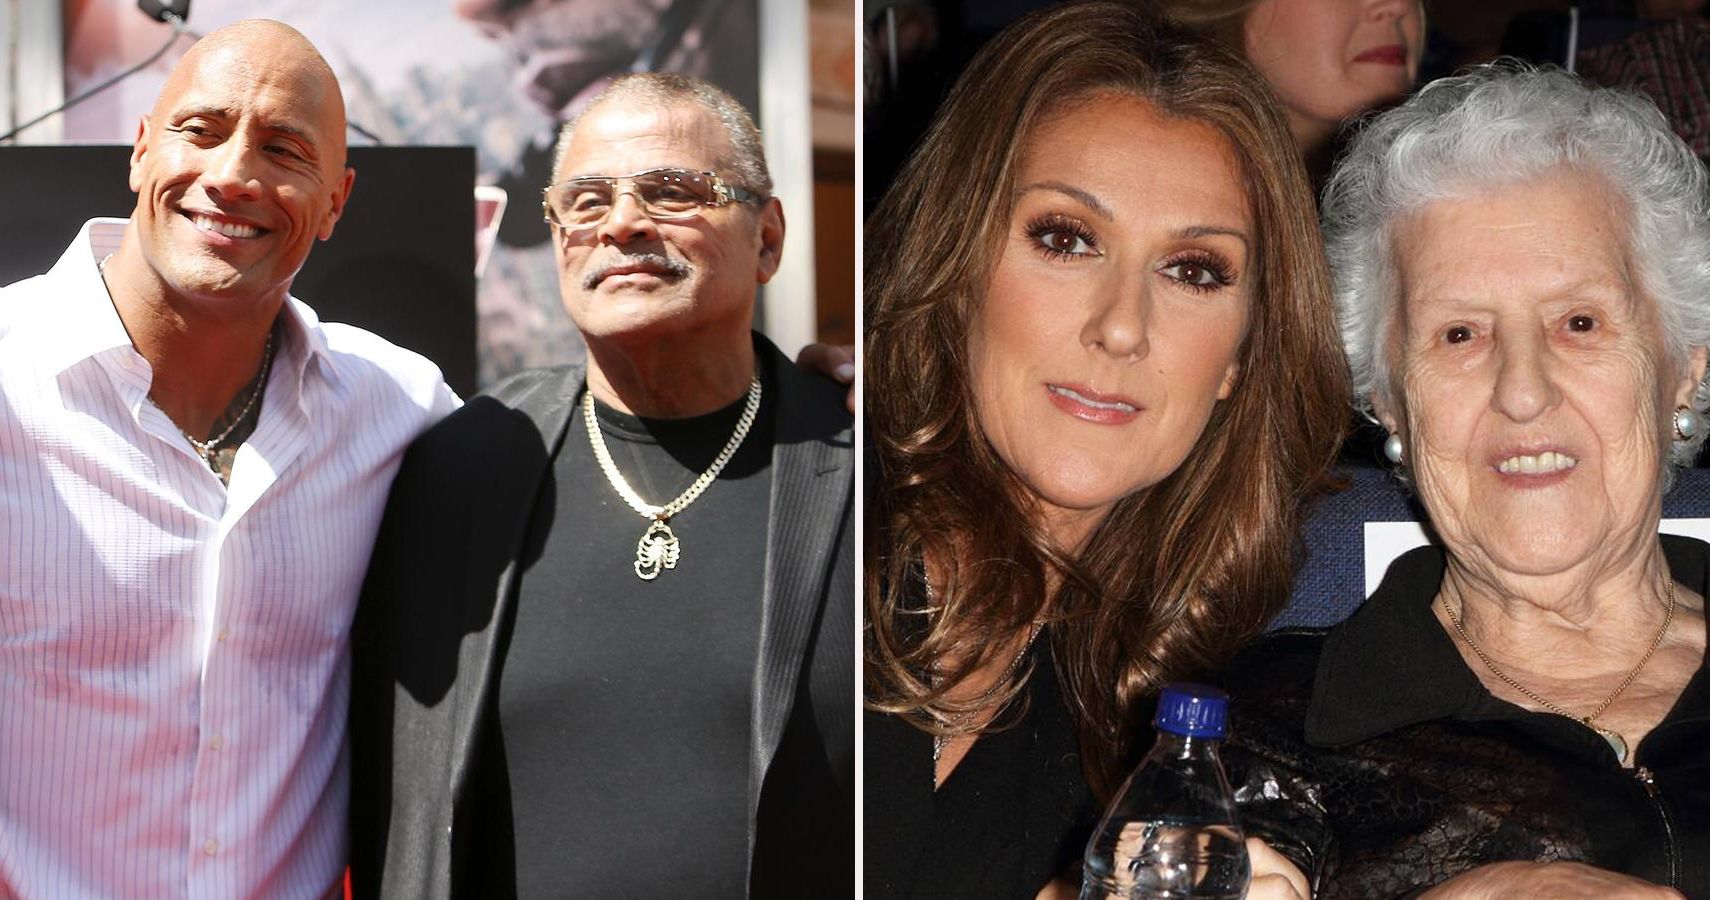 Fans Offer Condolences As The Rock And Celine Dion Mourn The Loss Of Their Parents